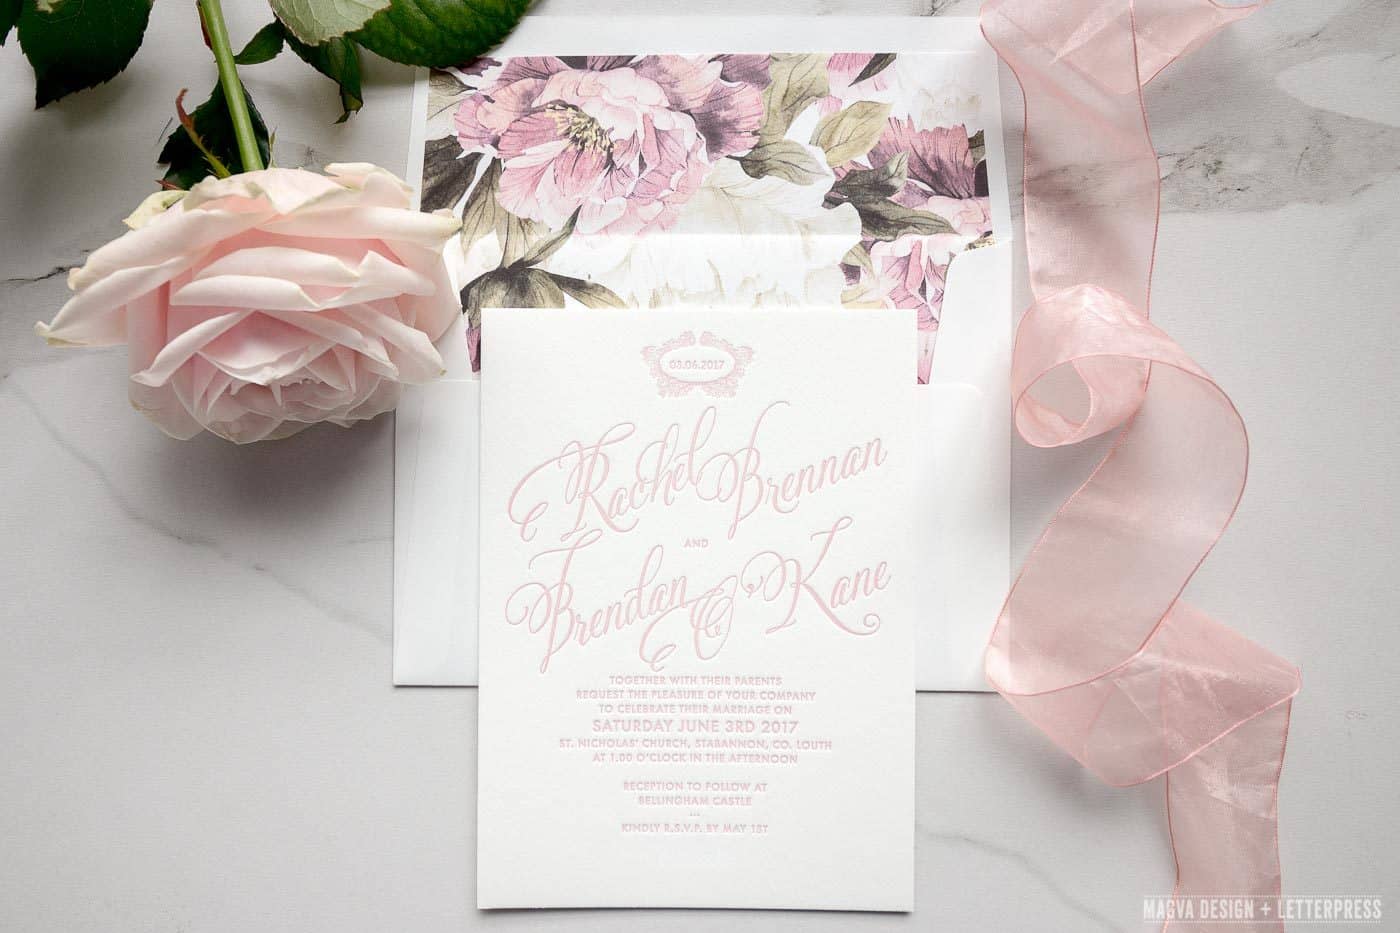 Wedding invitation printed in pink with matching envelope liners